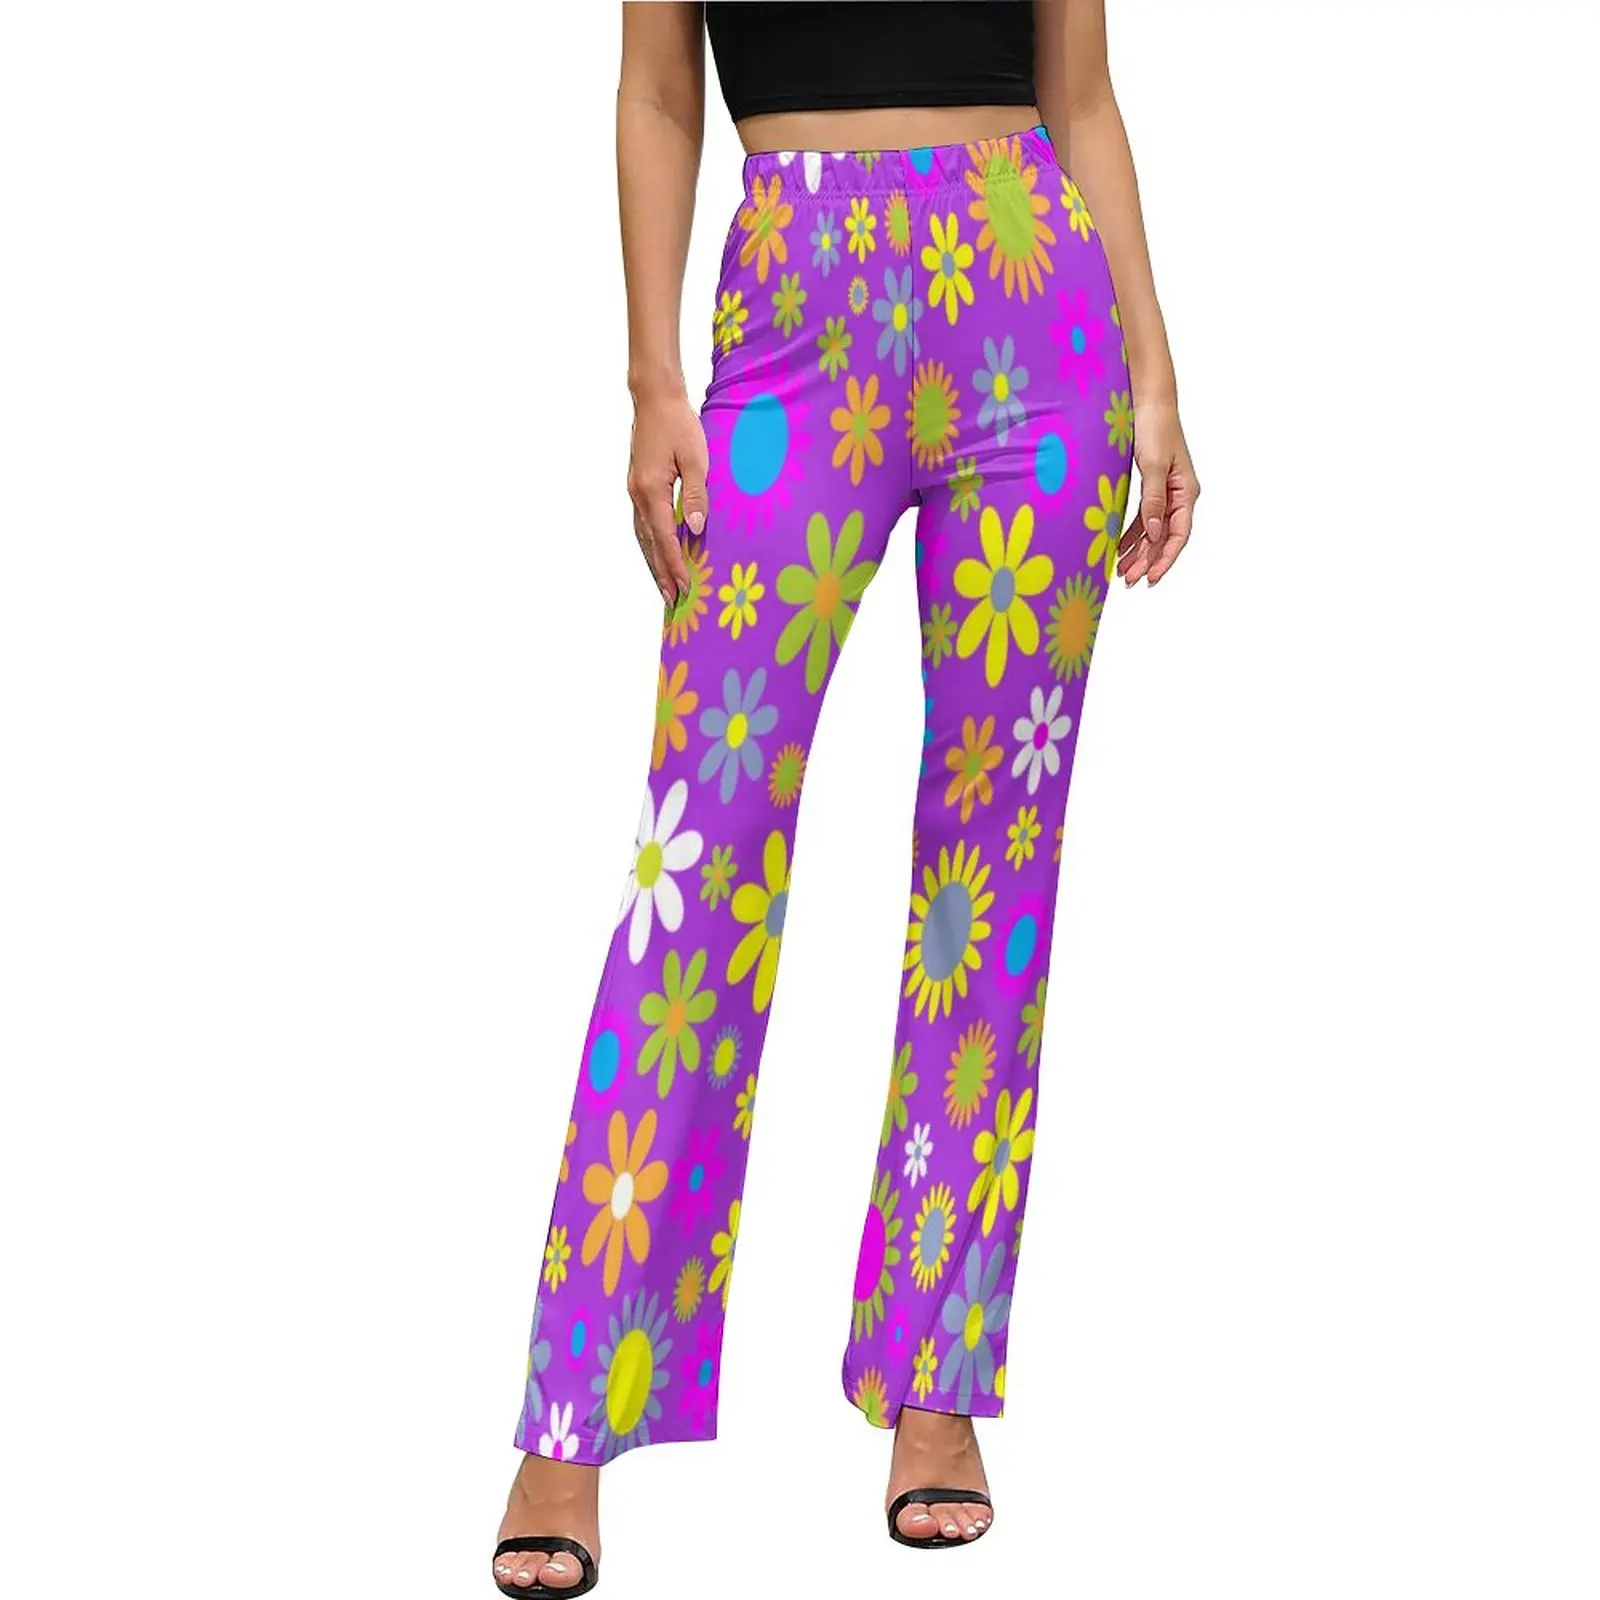 Rsychedelic Flower Power Pants Retro 60s Print Casual Flared Trousers Summer Female Printed Aesthetic Slim Fit Pants